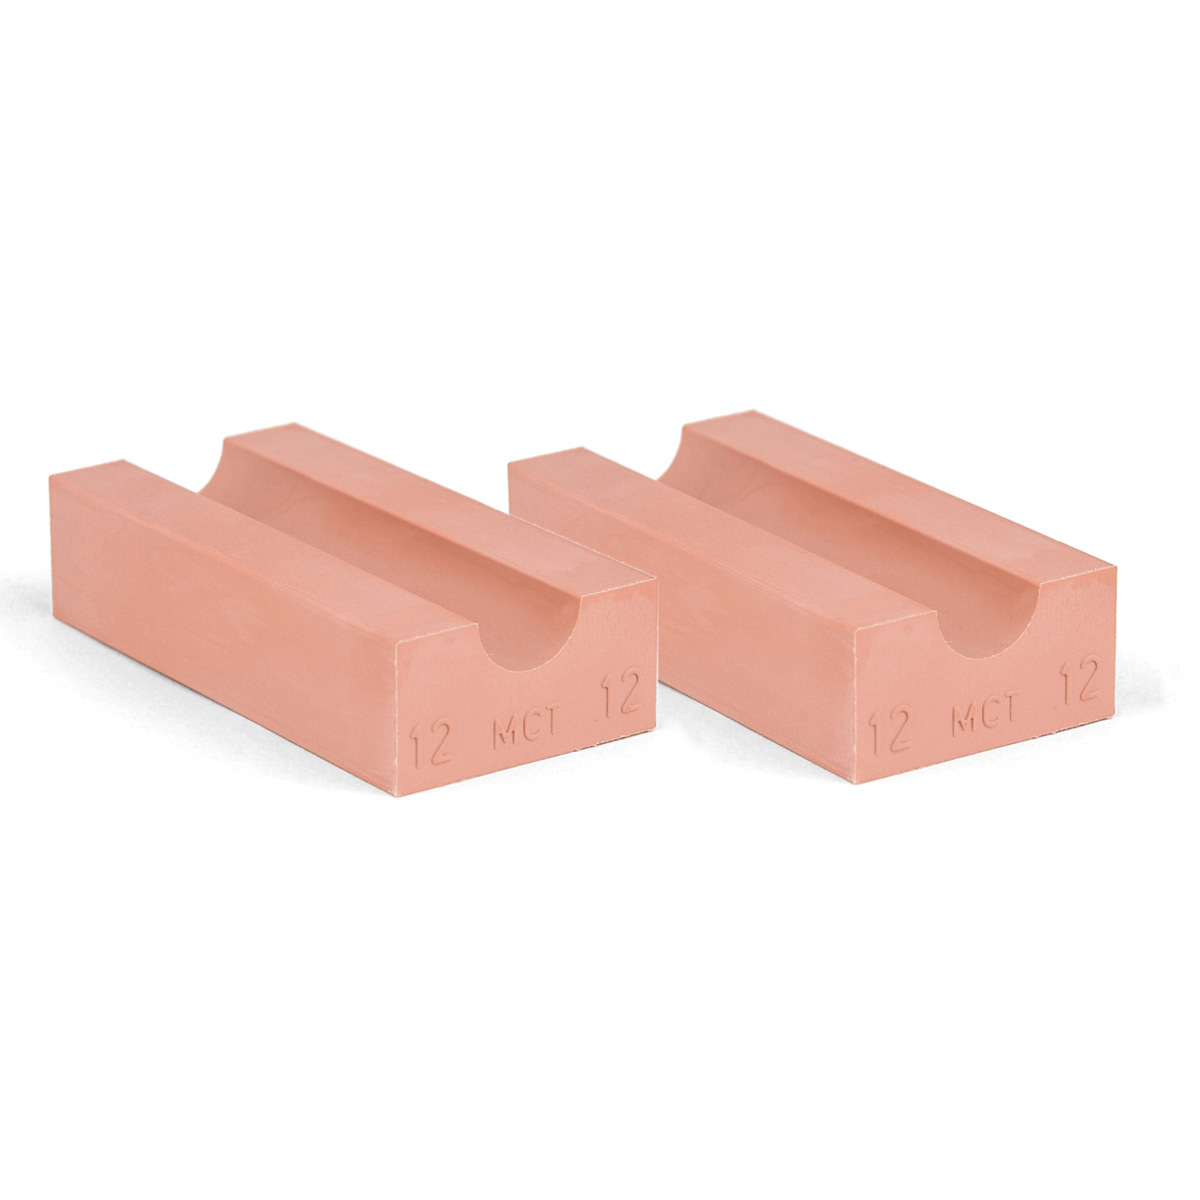 30-12*2 Set of 2 half insert block lycron 30mm, 30-12 for cable/pipe diam. 11.5-12.5mm